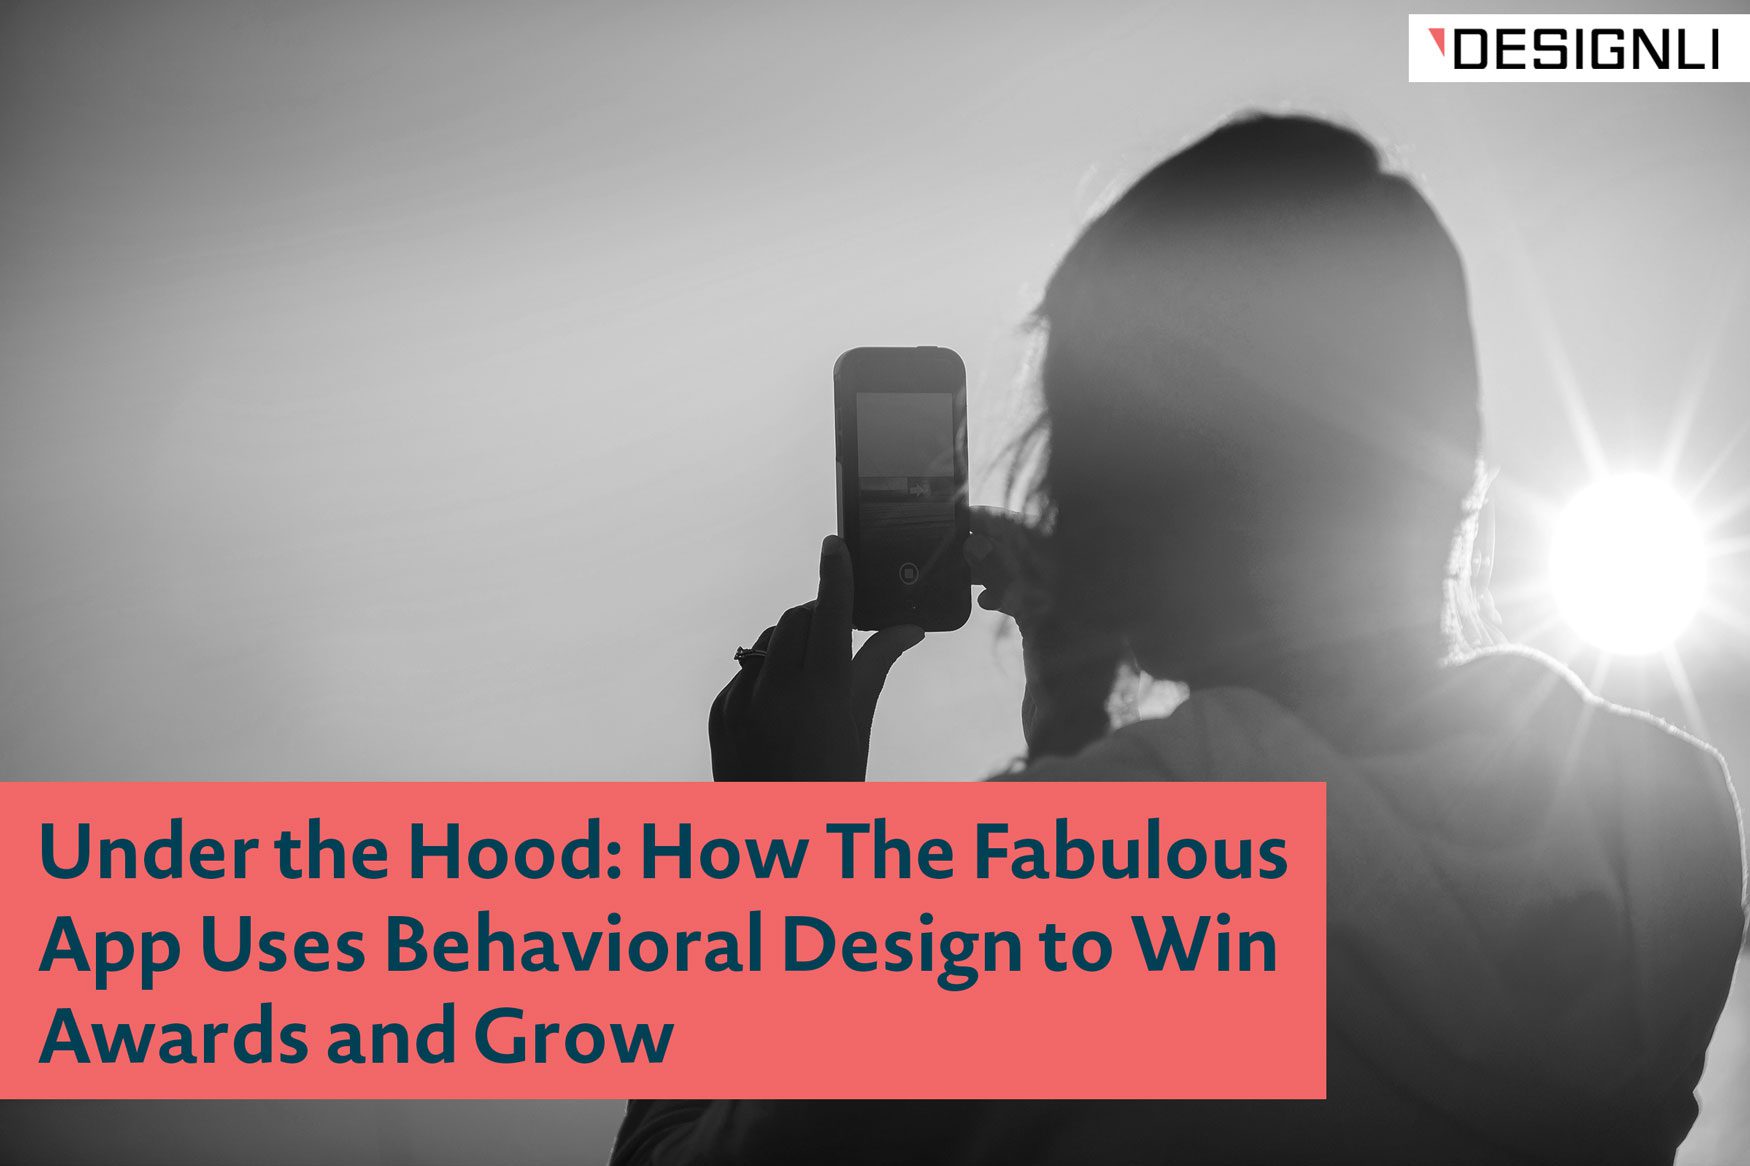 How The Fabulous App Uses Behavioral Design to Win Awards and Grow